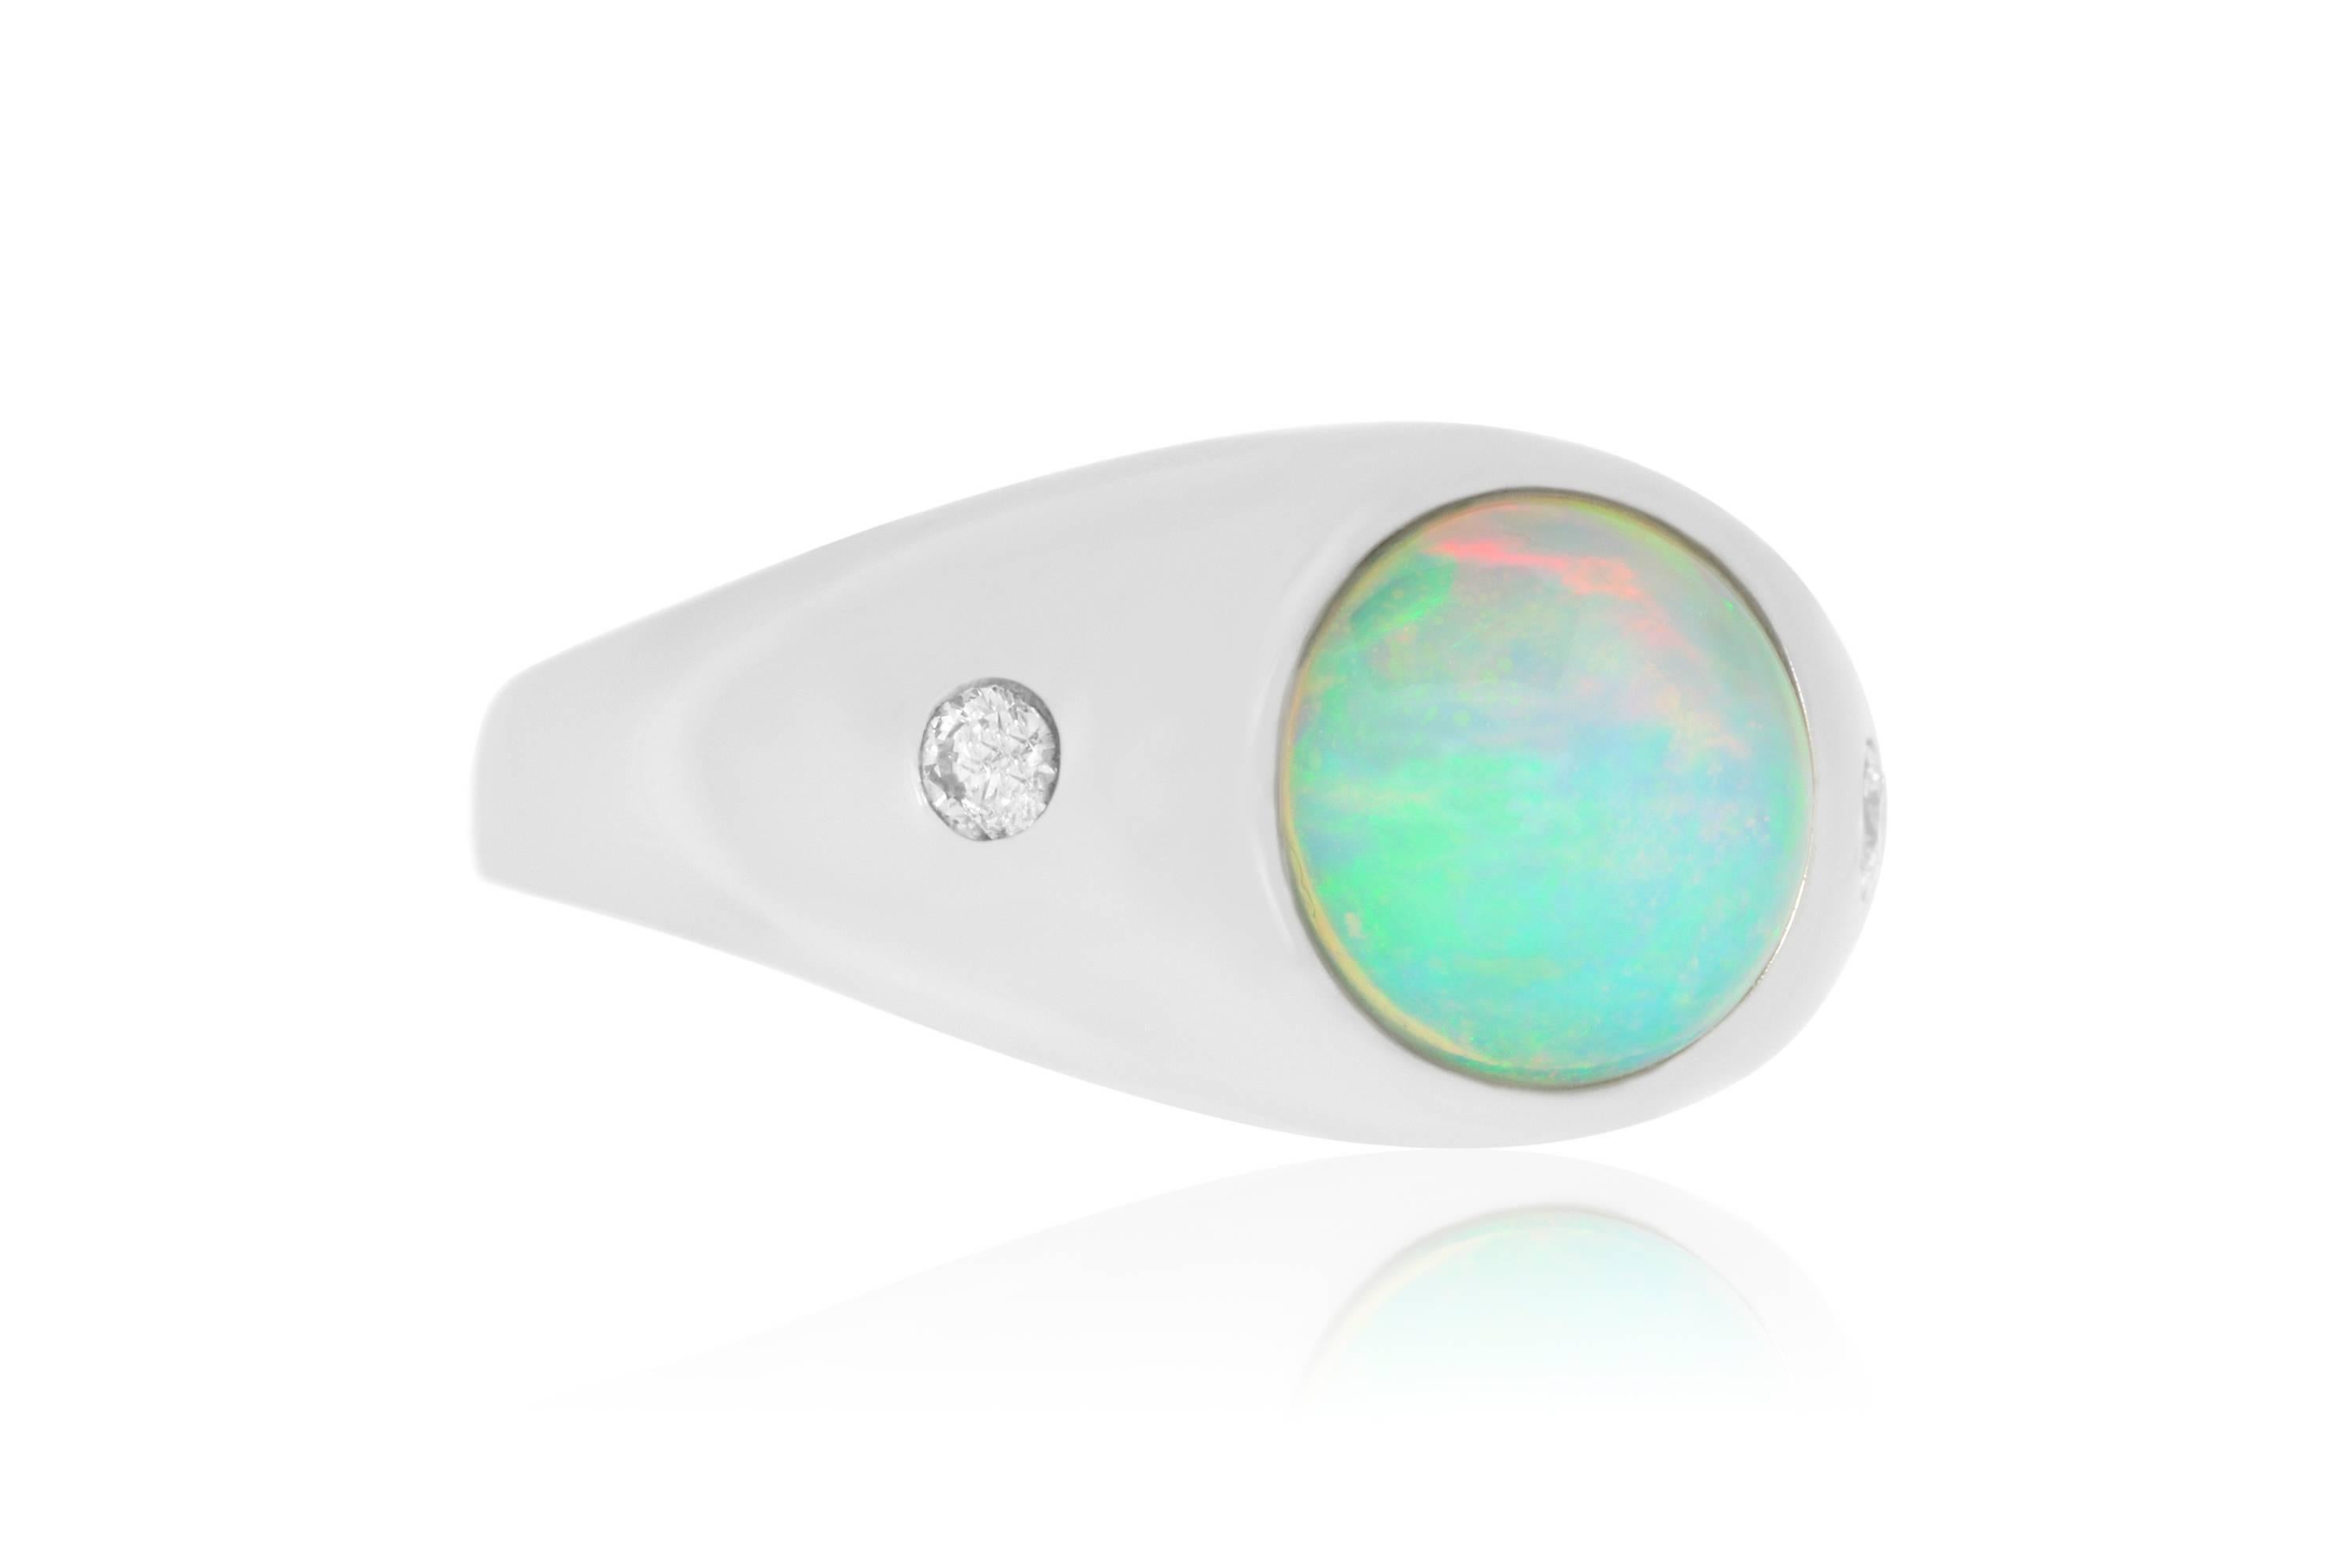 This unique round cut 1.86 carat Opal is set in a 14k White Gold with 2 accent white diamonds.   This sleek modern setting accentuates the alluring opal.

Material: 14k White Gold
Colored Diamond:: 1 Round Cut Opal at 1.86 carats.
Diamonds: 2 Round